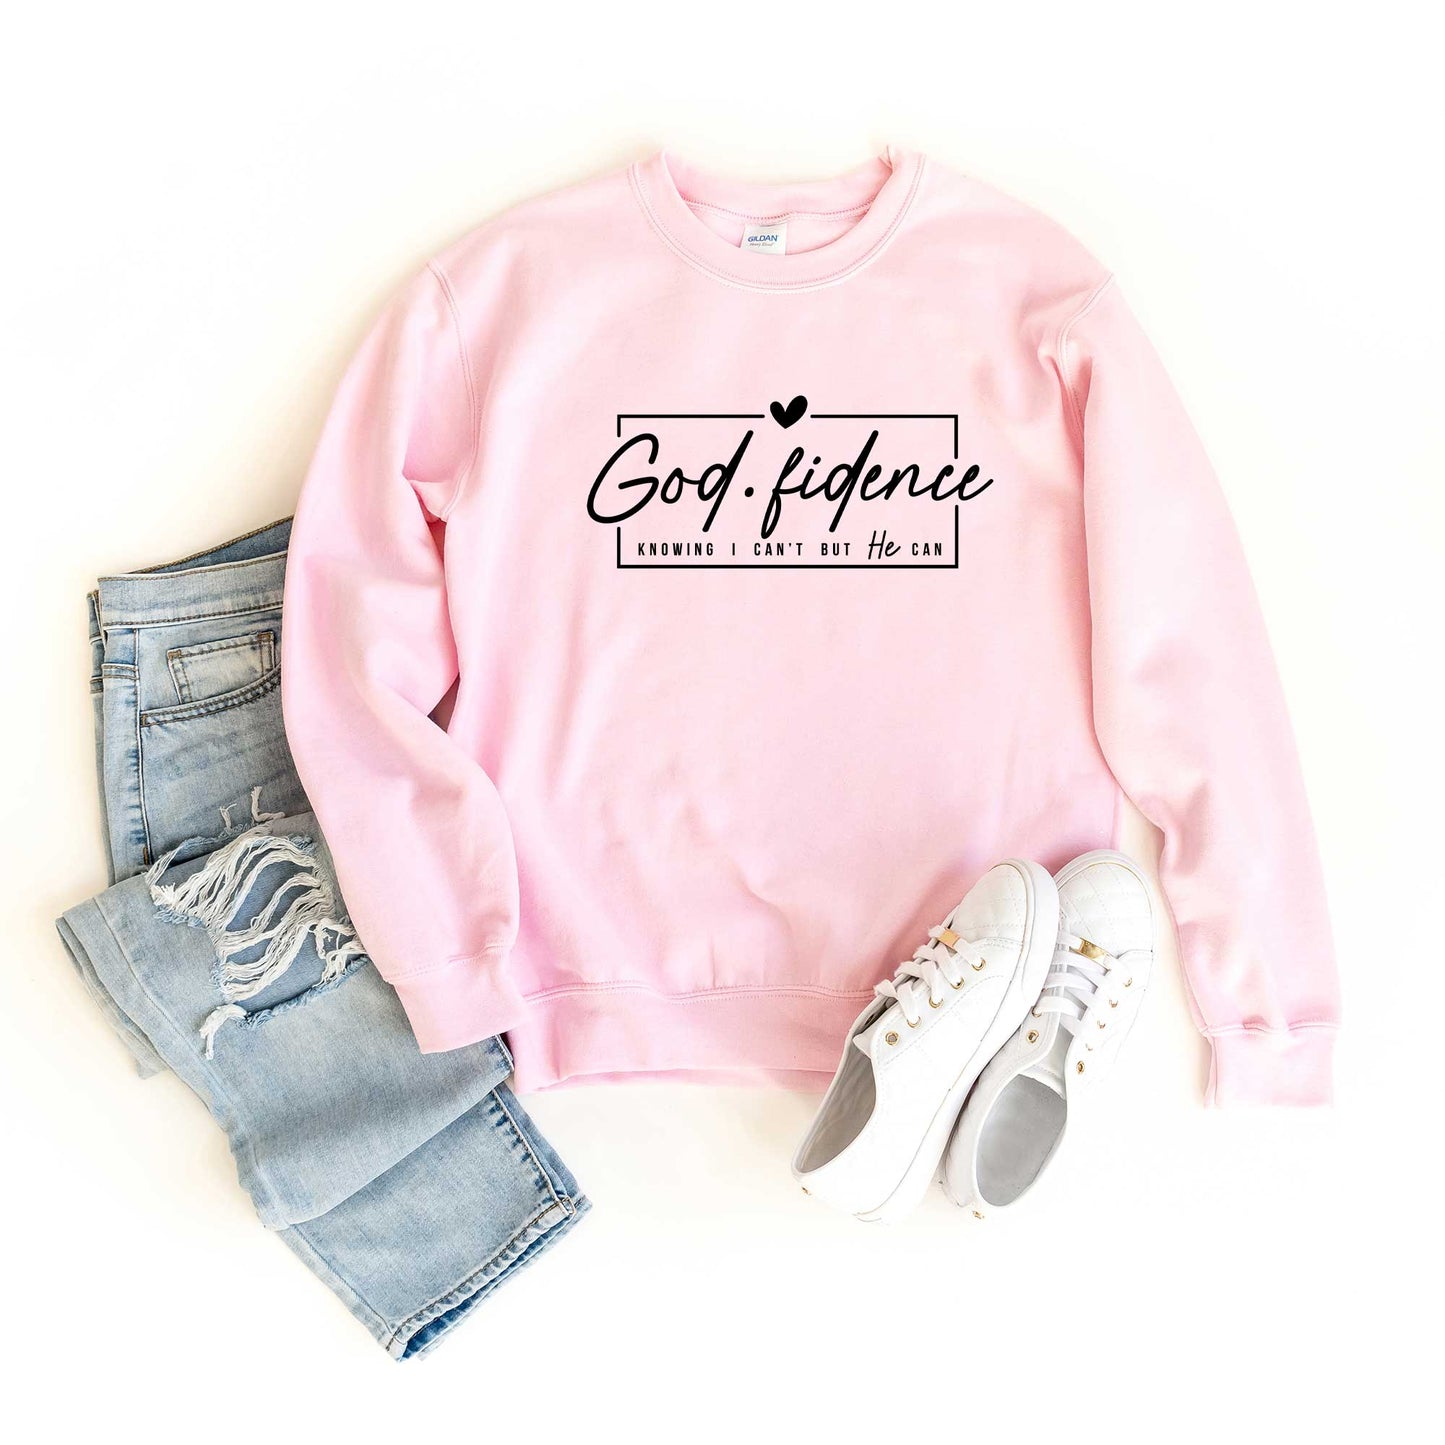 Godfidence Knowing I Can't But He Can | Sweatshirt